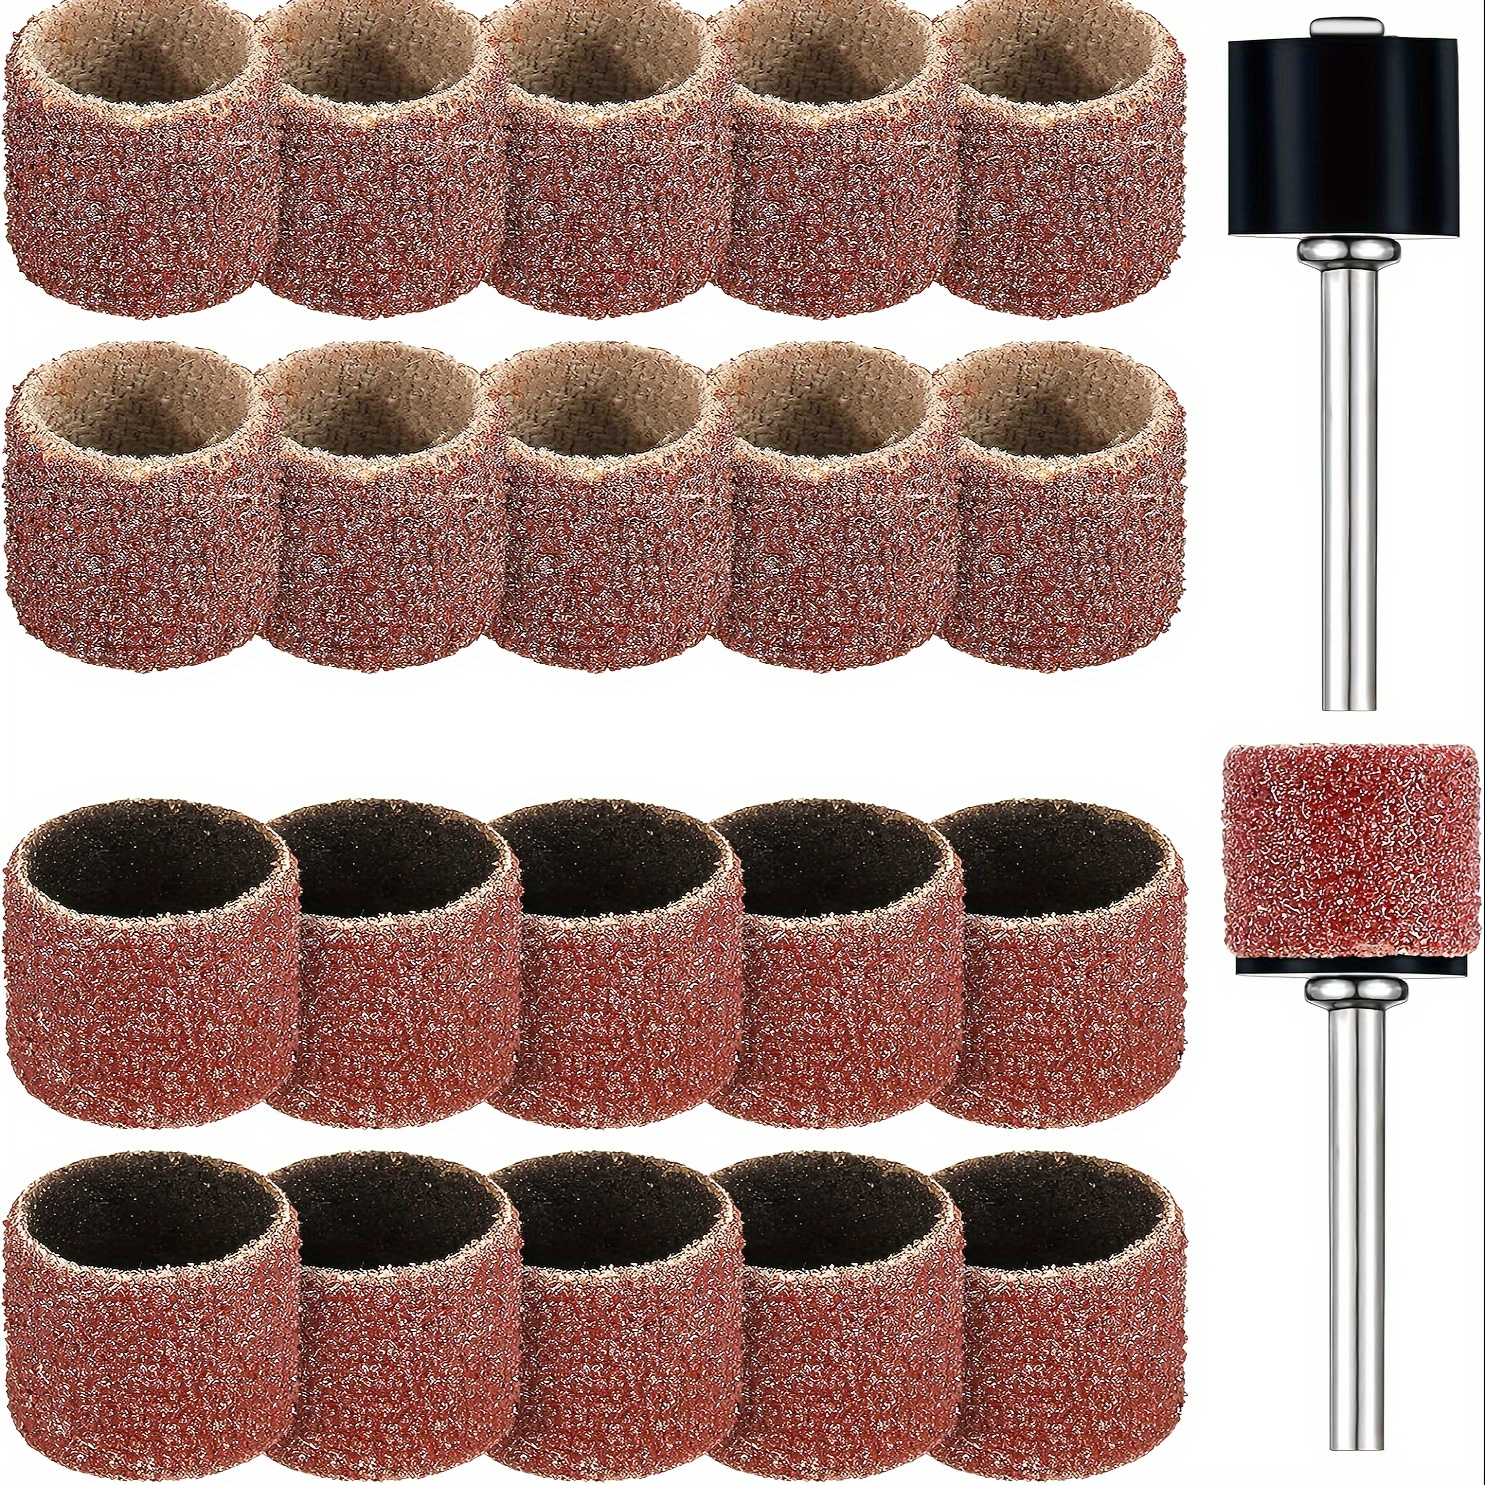 

22 Pet Nail Grinder Replacement Kit With Grit Sanding Bands Pet Nail Smoother Dog Claw Care Black Grinding Drums Dog Nail Grinder Replacement Dog Claw Grooming Supplies (1/2 Inch 60 Grit And 100 Grit)